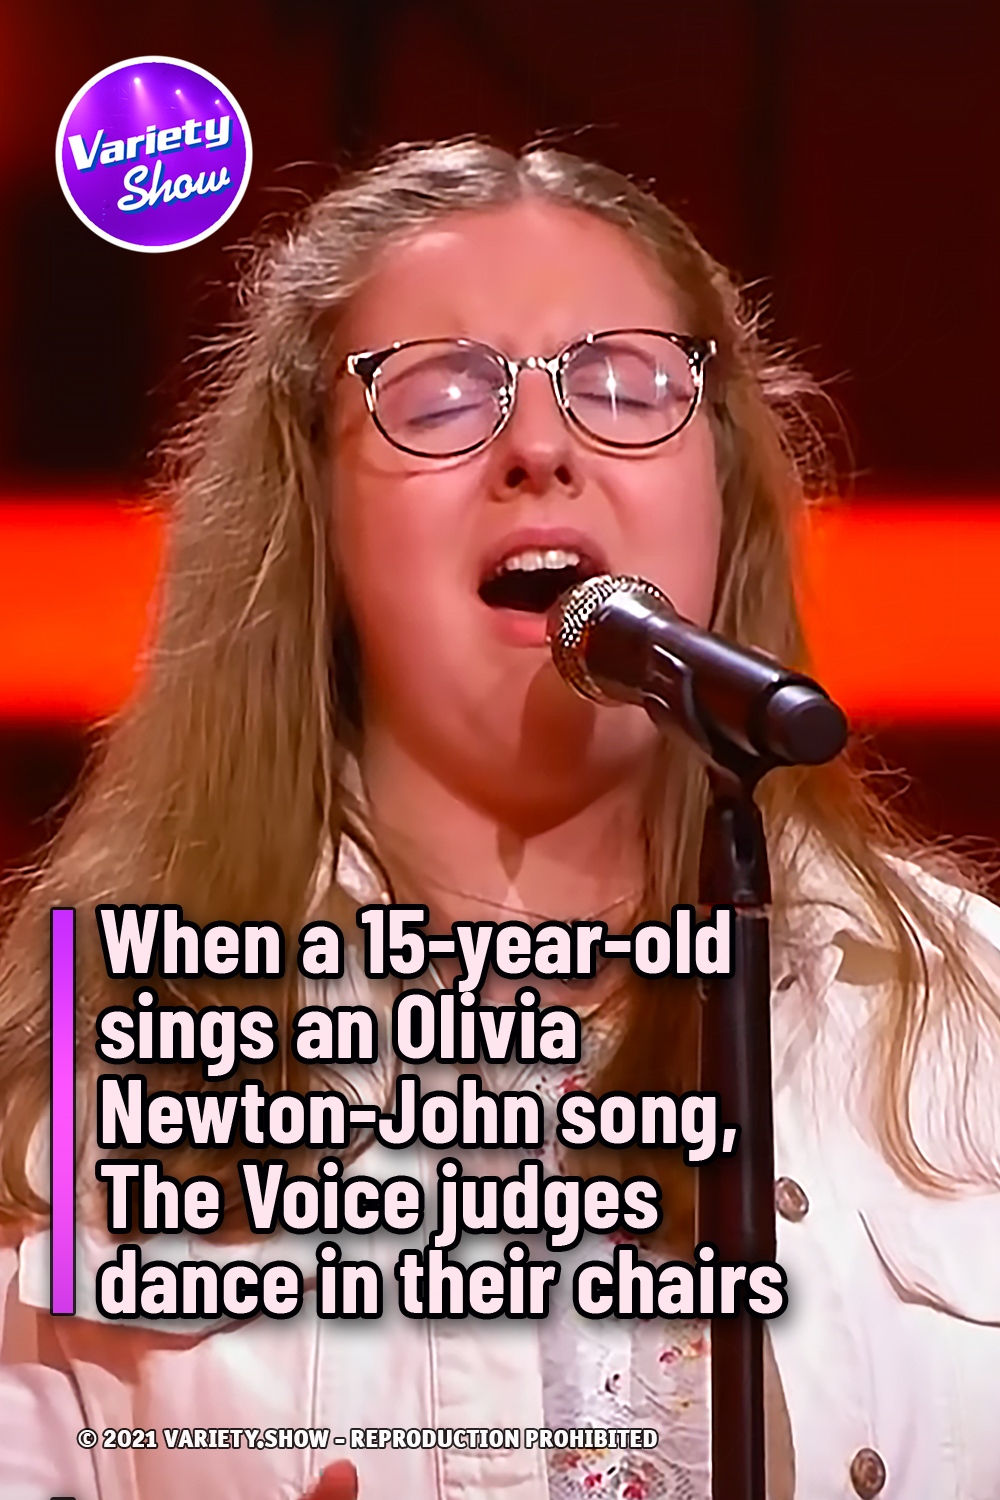 When a 15-year-old sings an Olivia Newton-John song, The Voice judges dance in their chairs